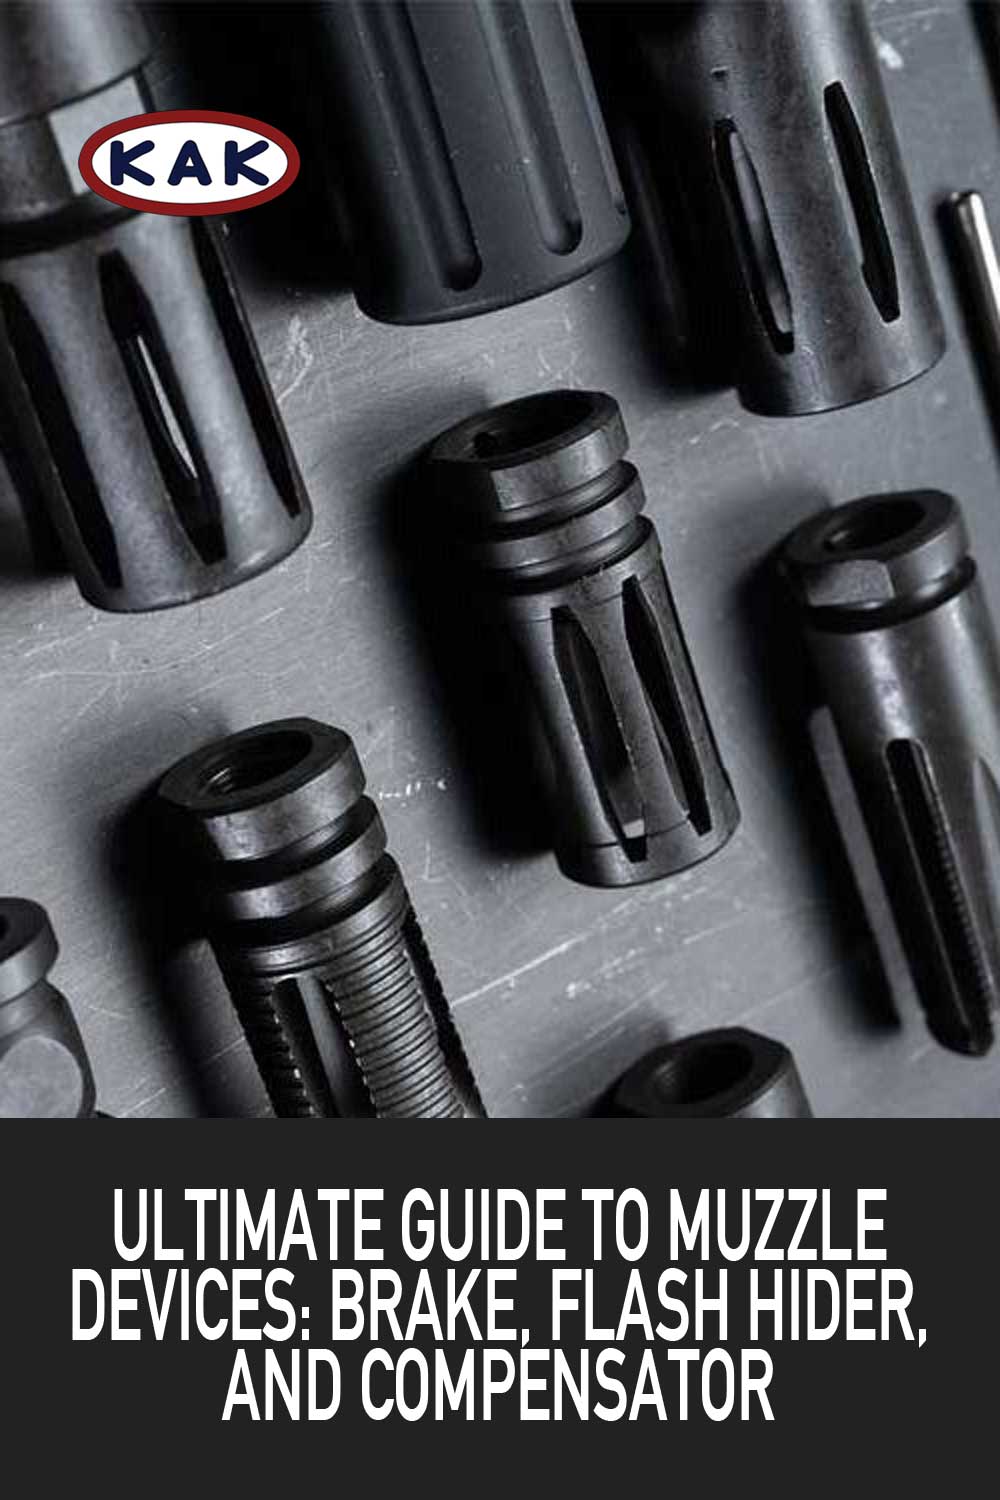 Ultimate Guide to Muzzle Devices: Brake, Flash Hider, and Compensator